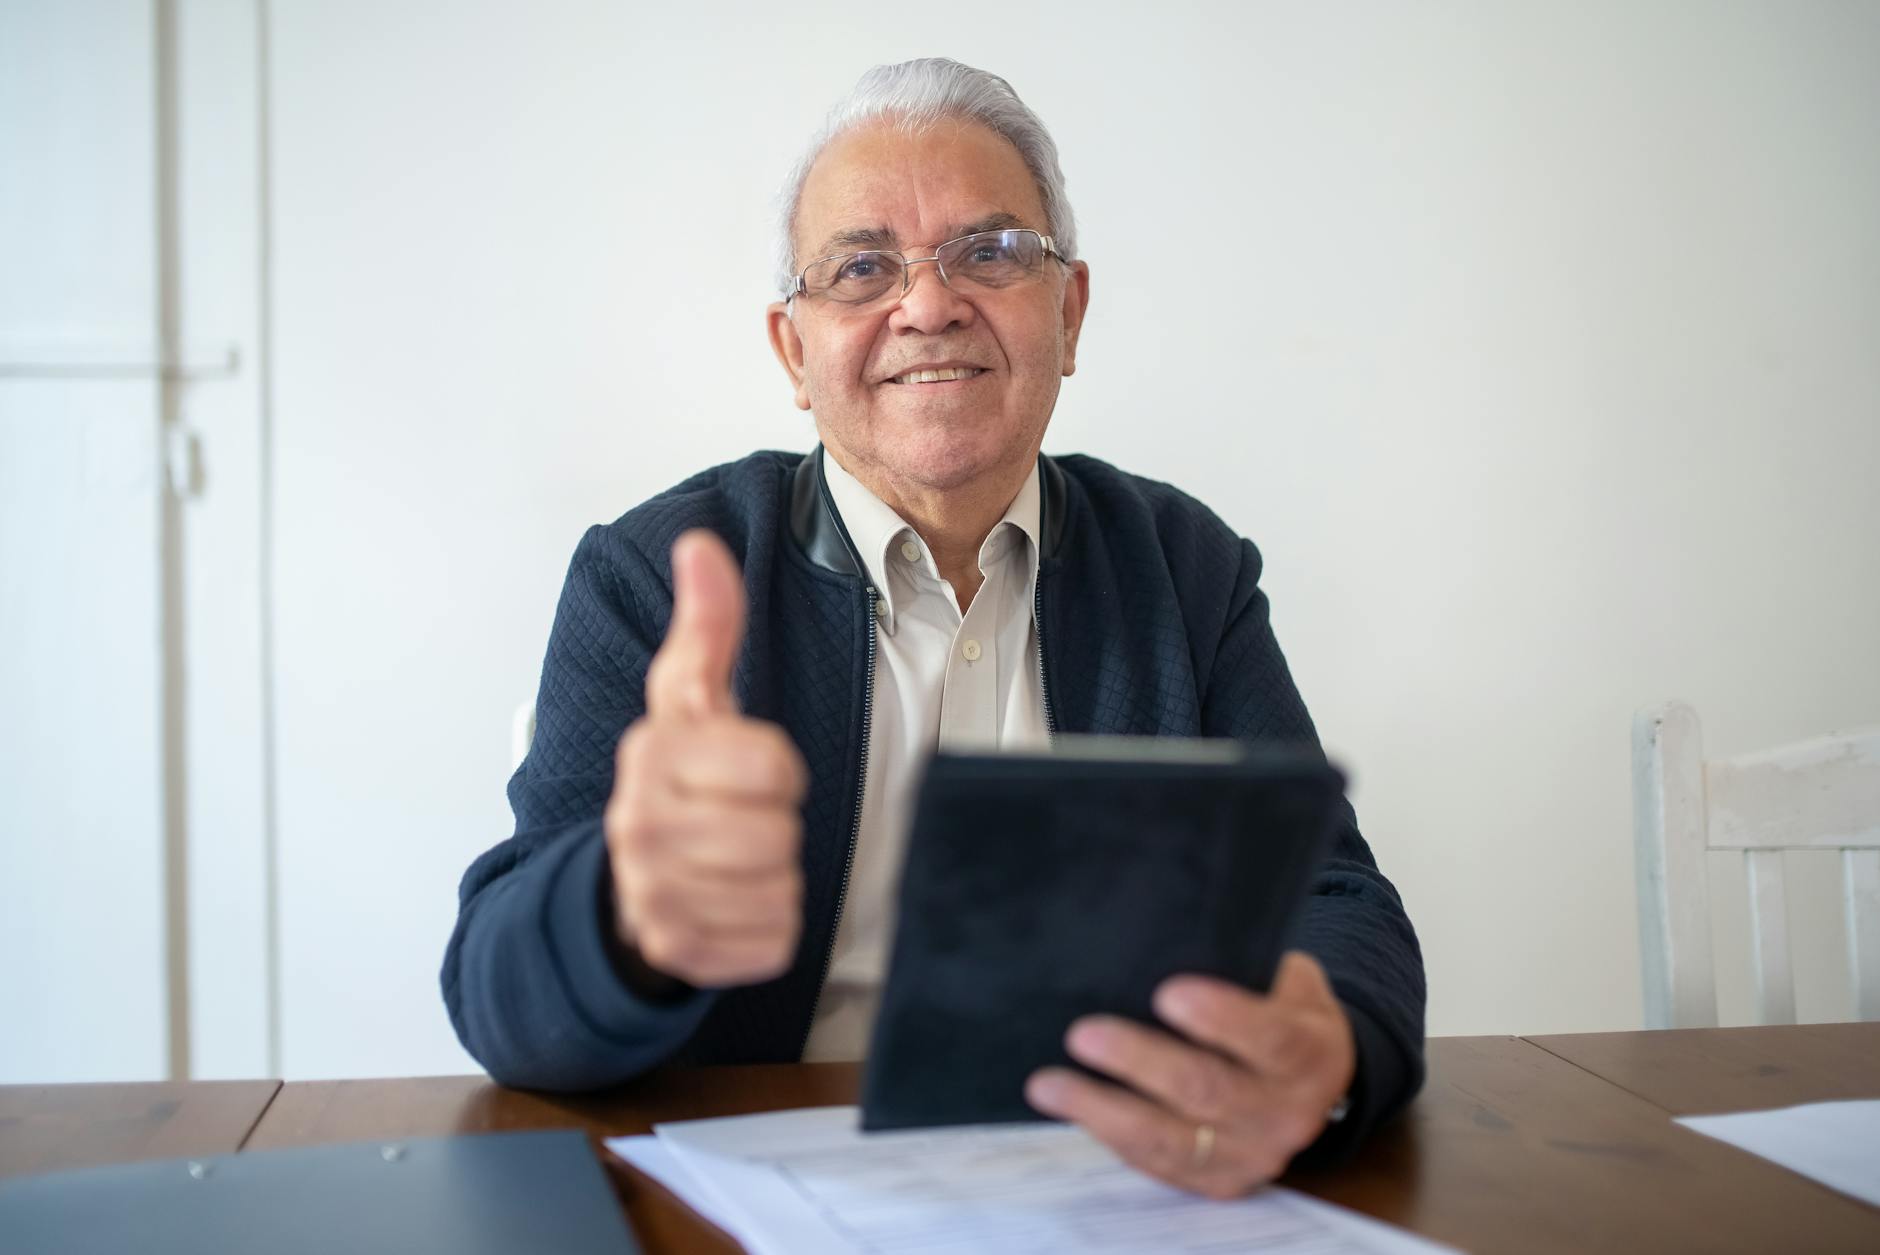 Man in Black Jacket Holding Black Tablet and Showing Thumb Up